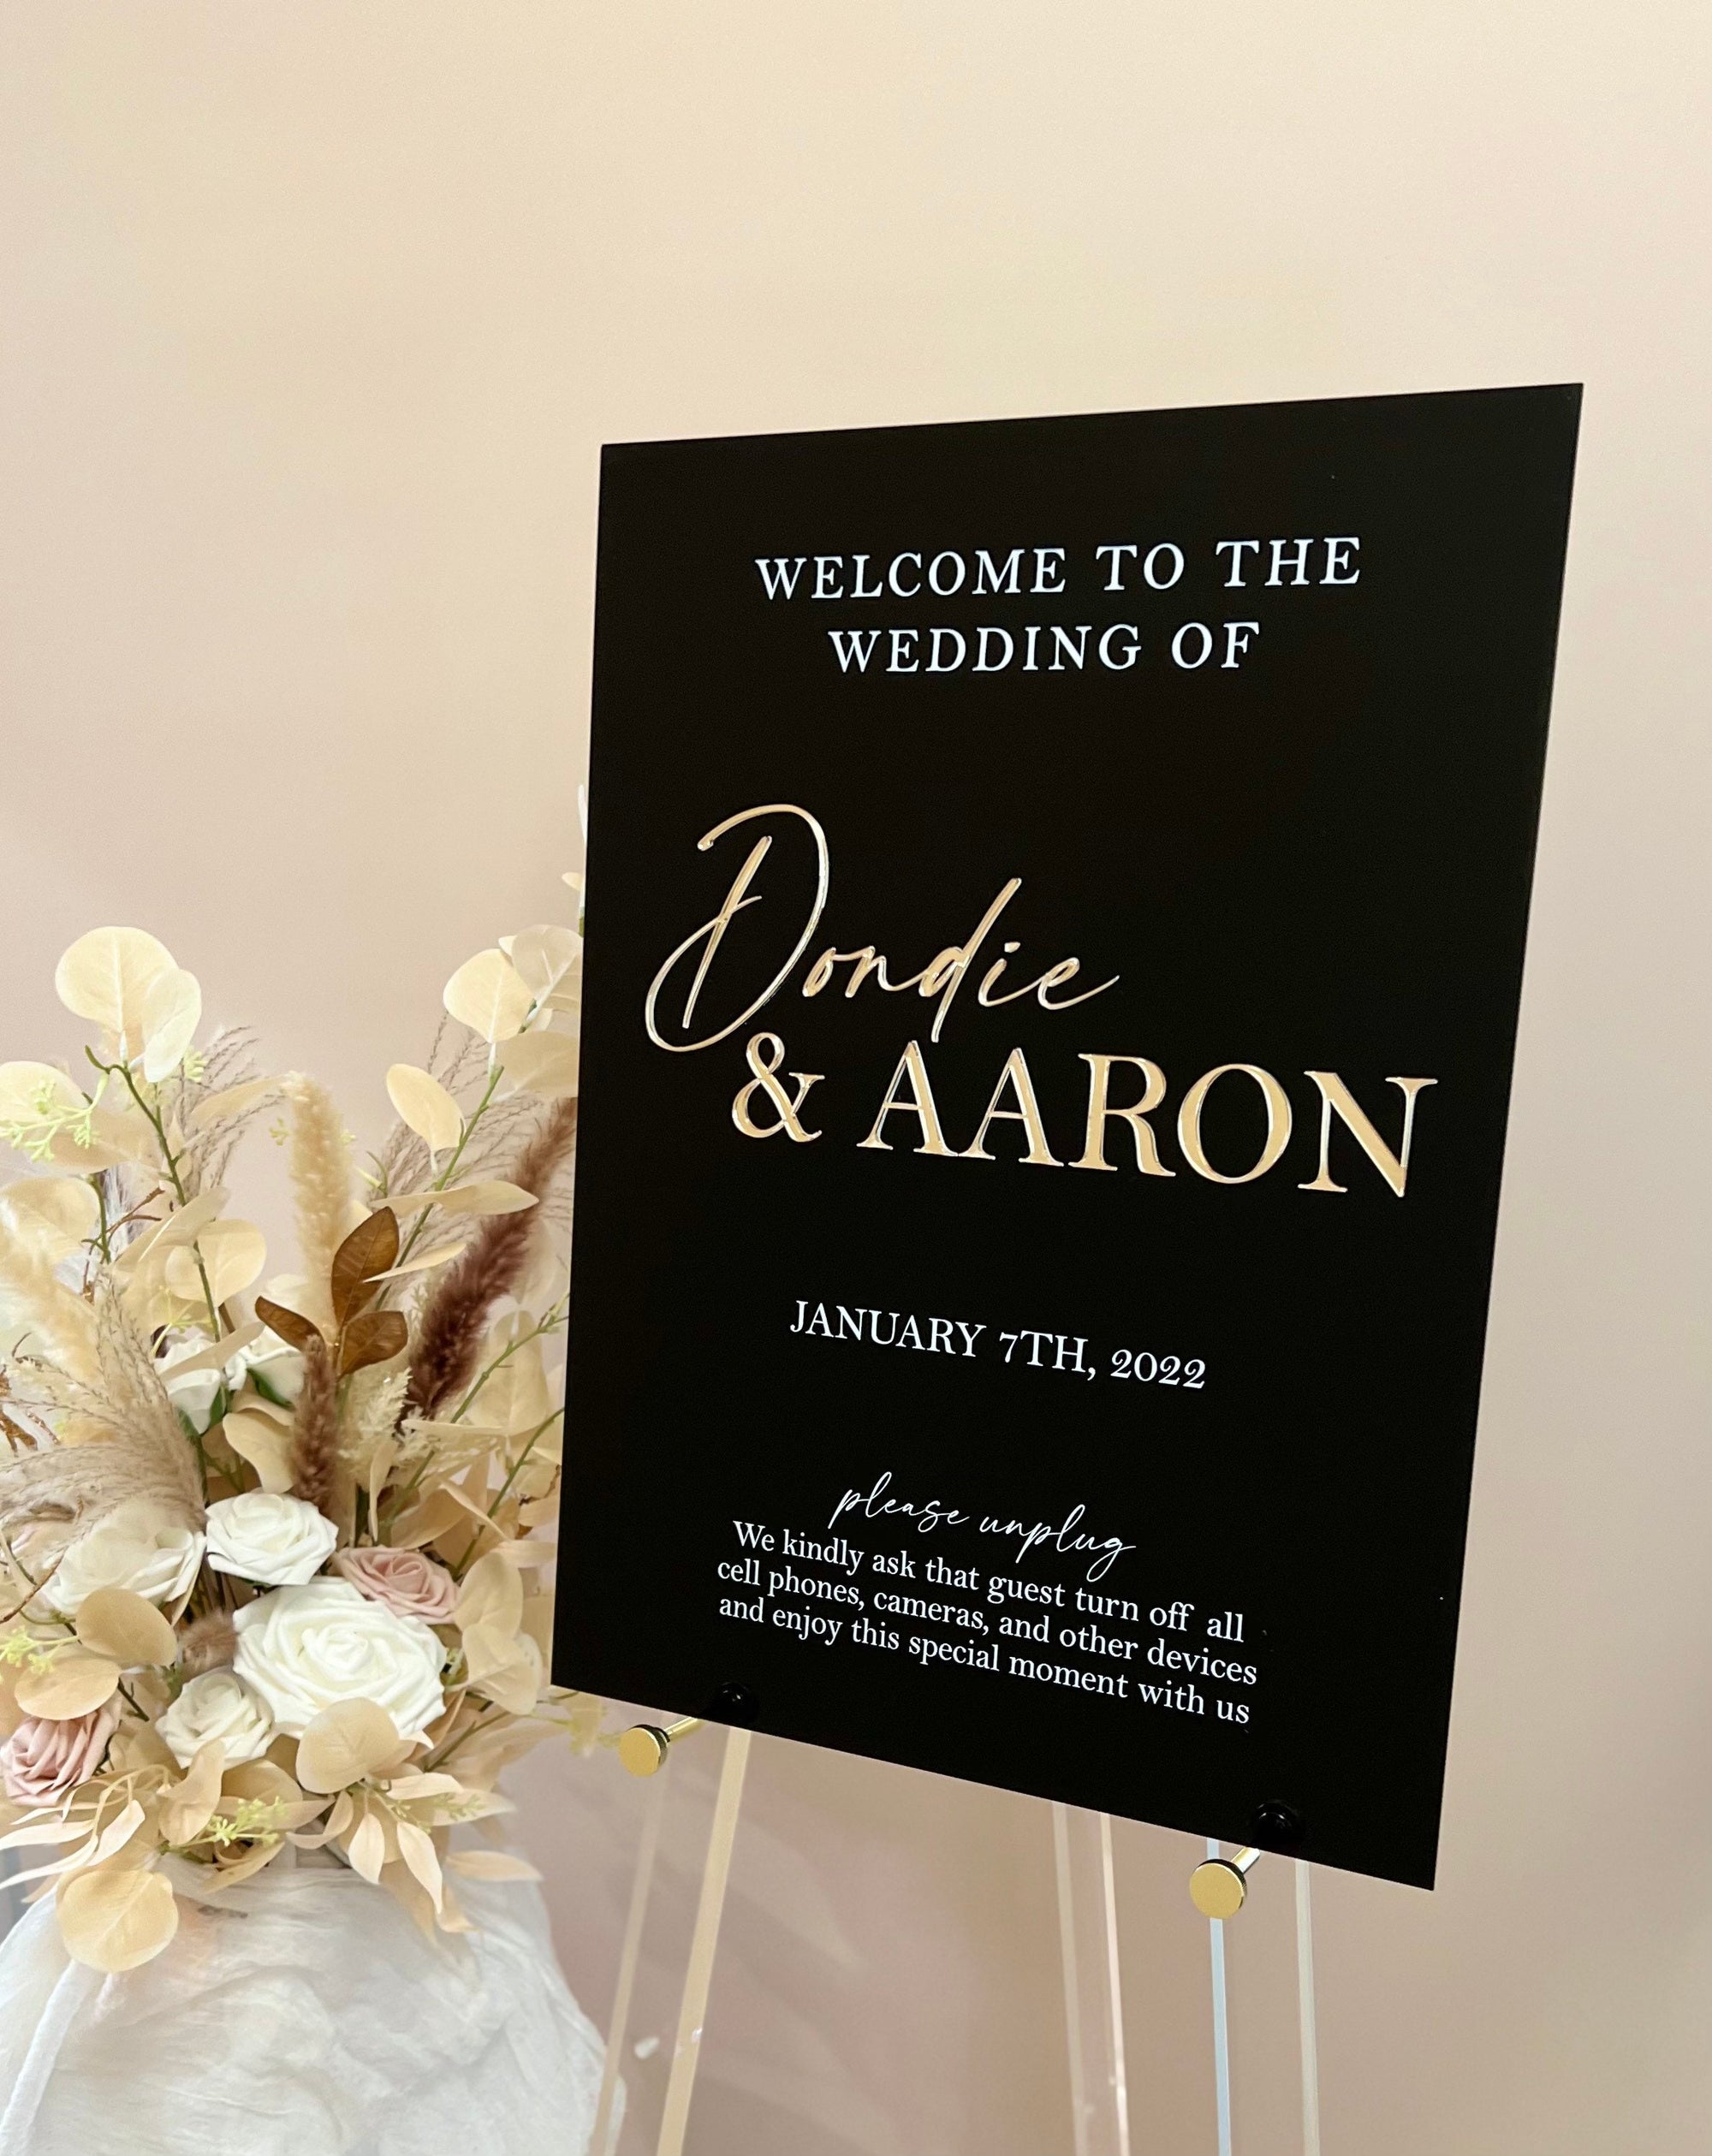 3D Event Entry Signs with Laser Cut Wording - Sign Sizes 18"x24" or 24"x36" 3D-DAS